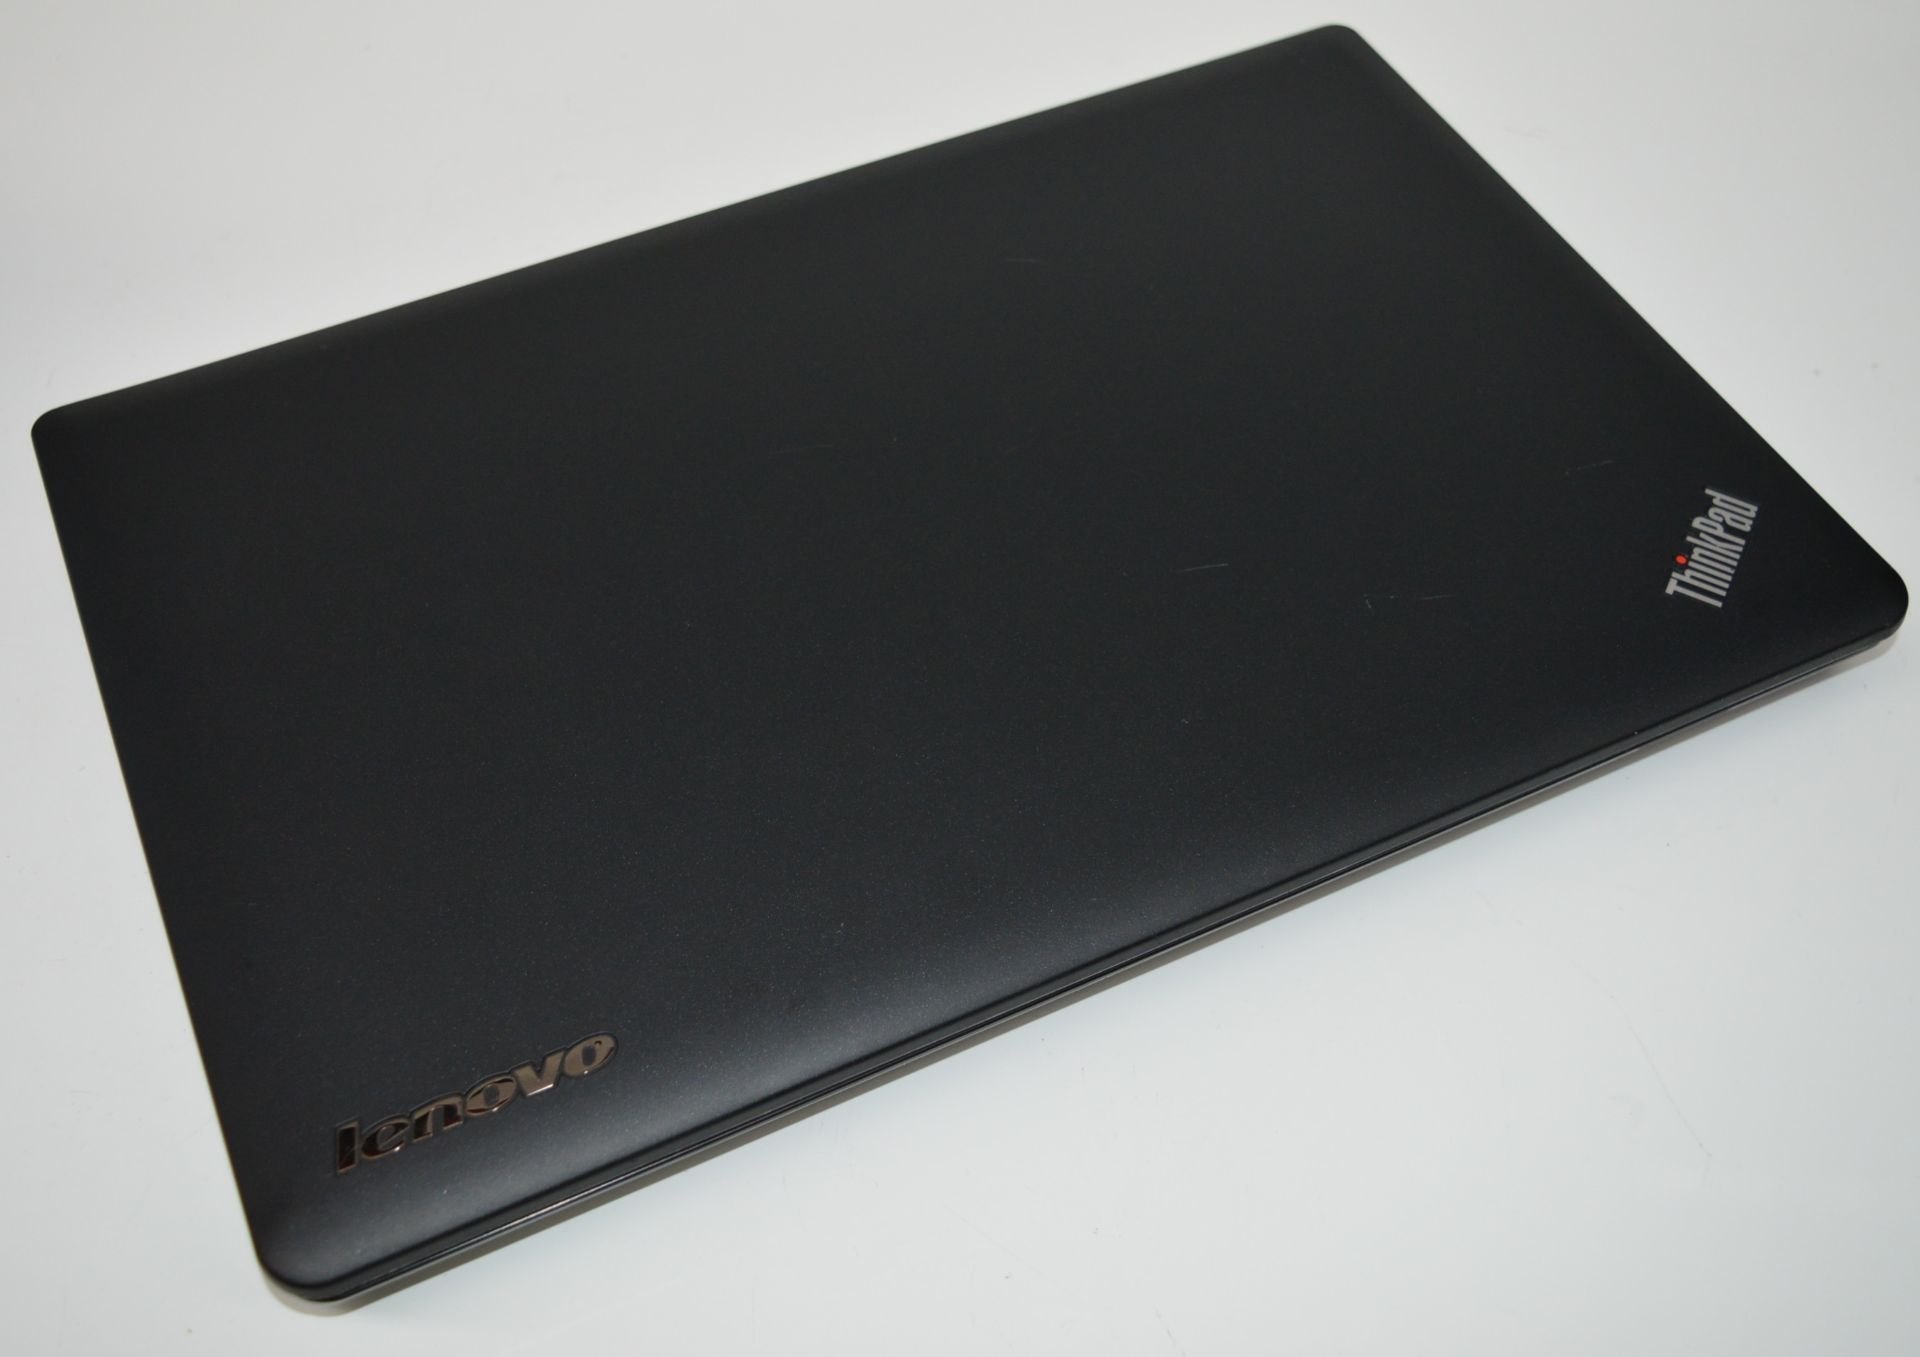 1 x Lenovo Thinkpad E530 Laptop Computer - Features 15.6 Inch Screen, Intel Core i3-2370M 2.4ghz - Image 3 of 5